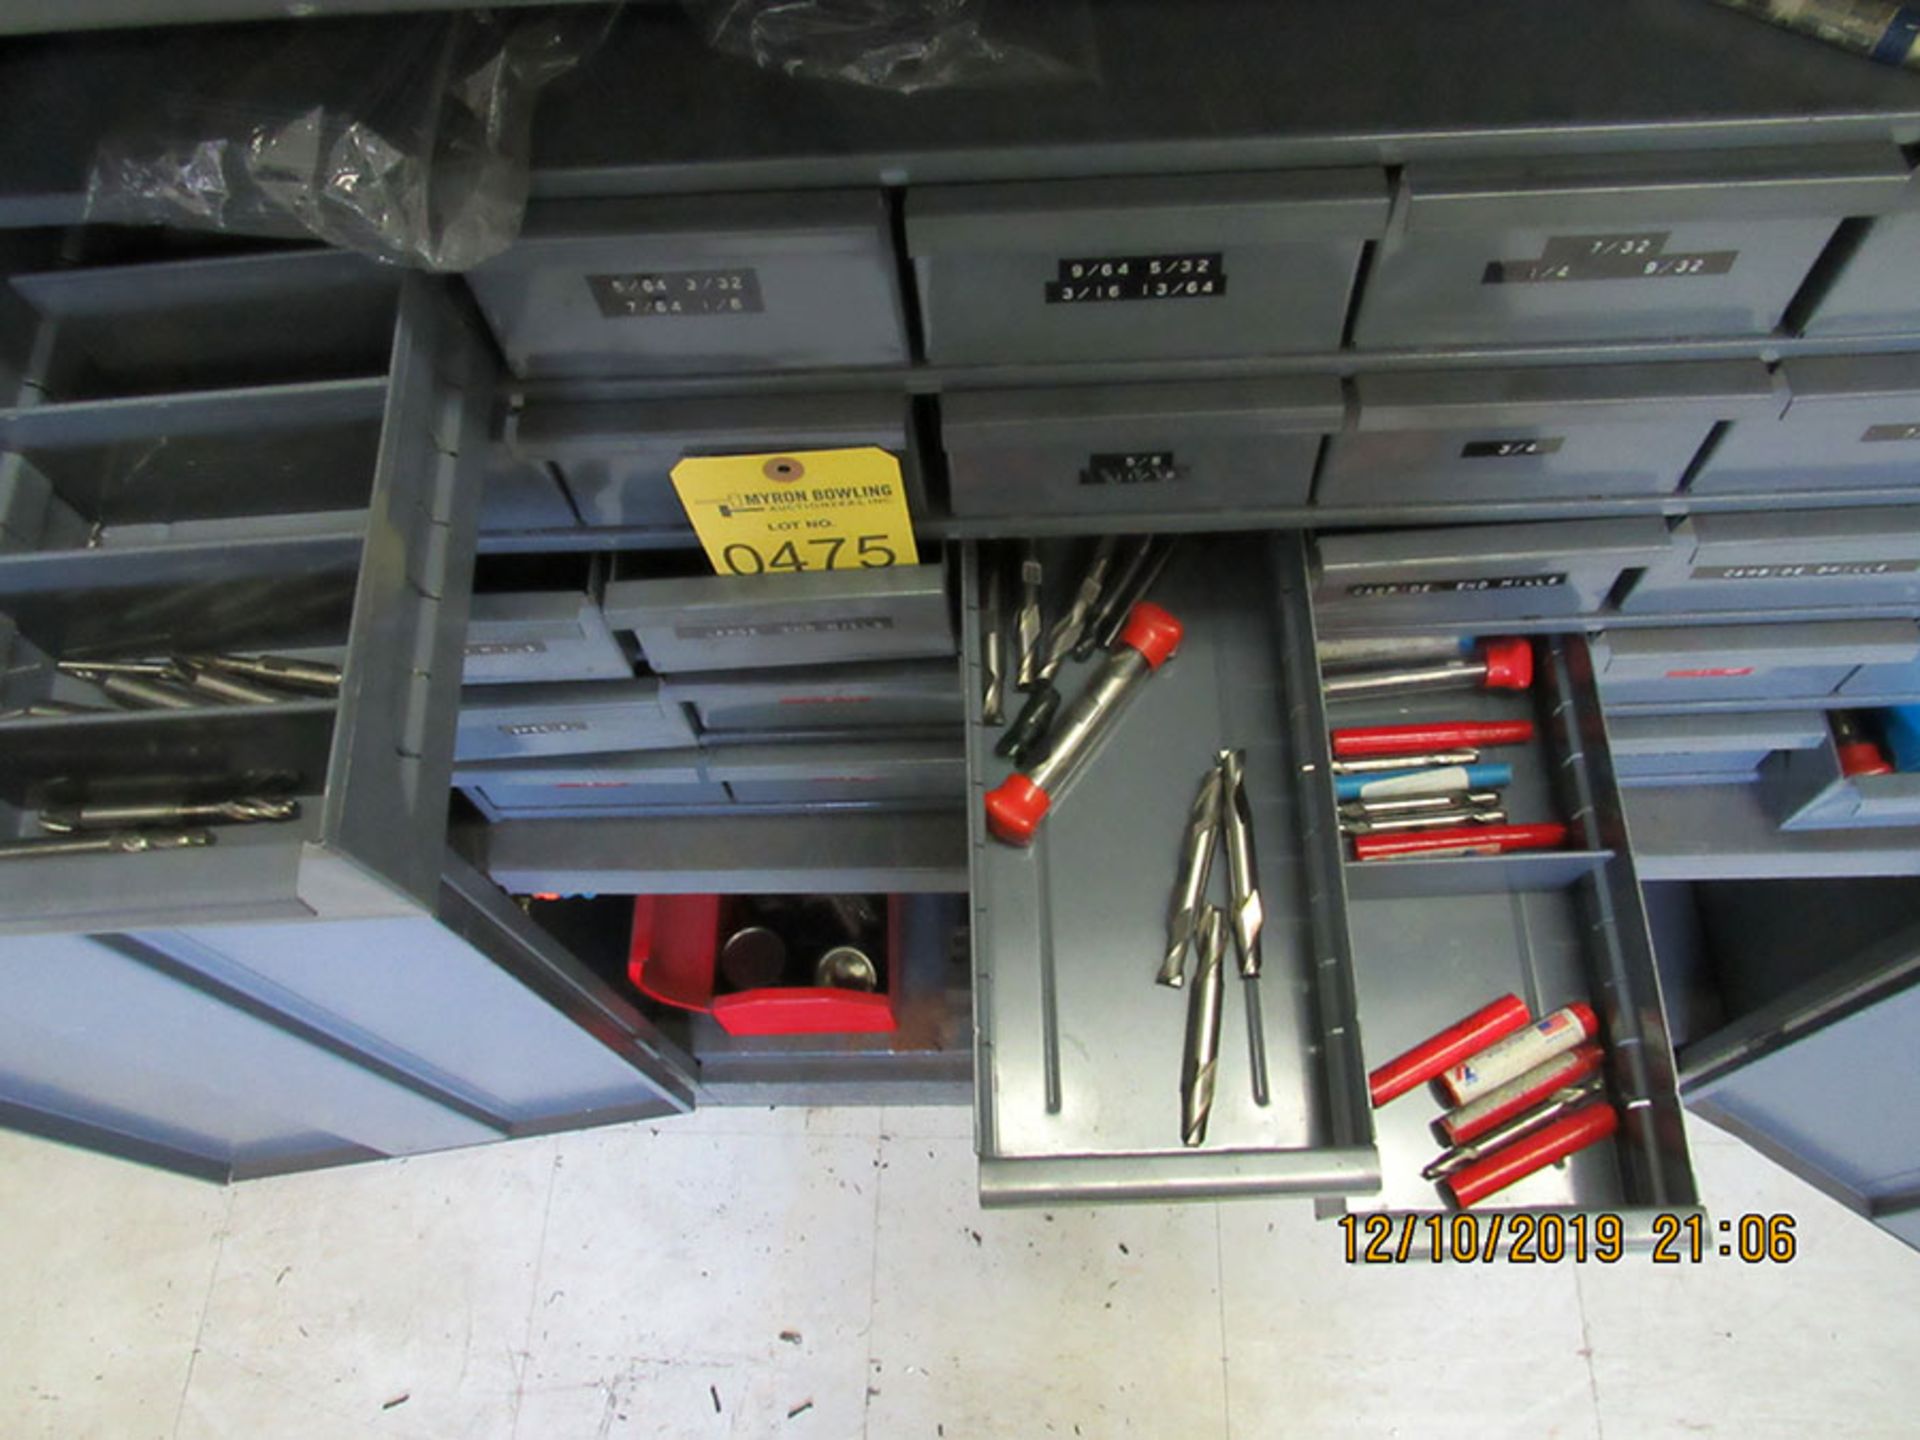 2-DOOR CABINET WITH CONTENTS; DRILL BITS & CUTTERS - Image 2 of 3